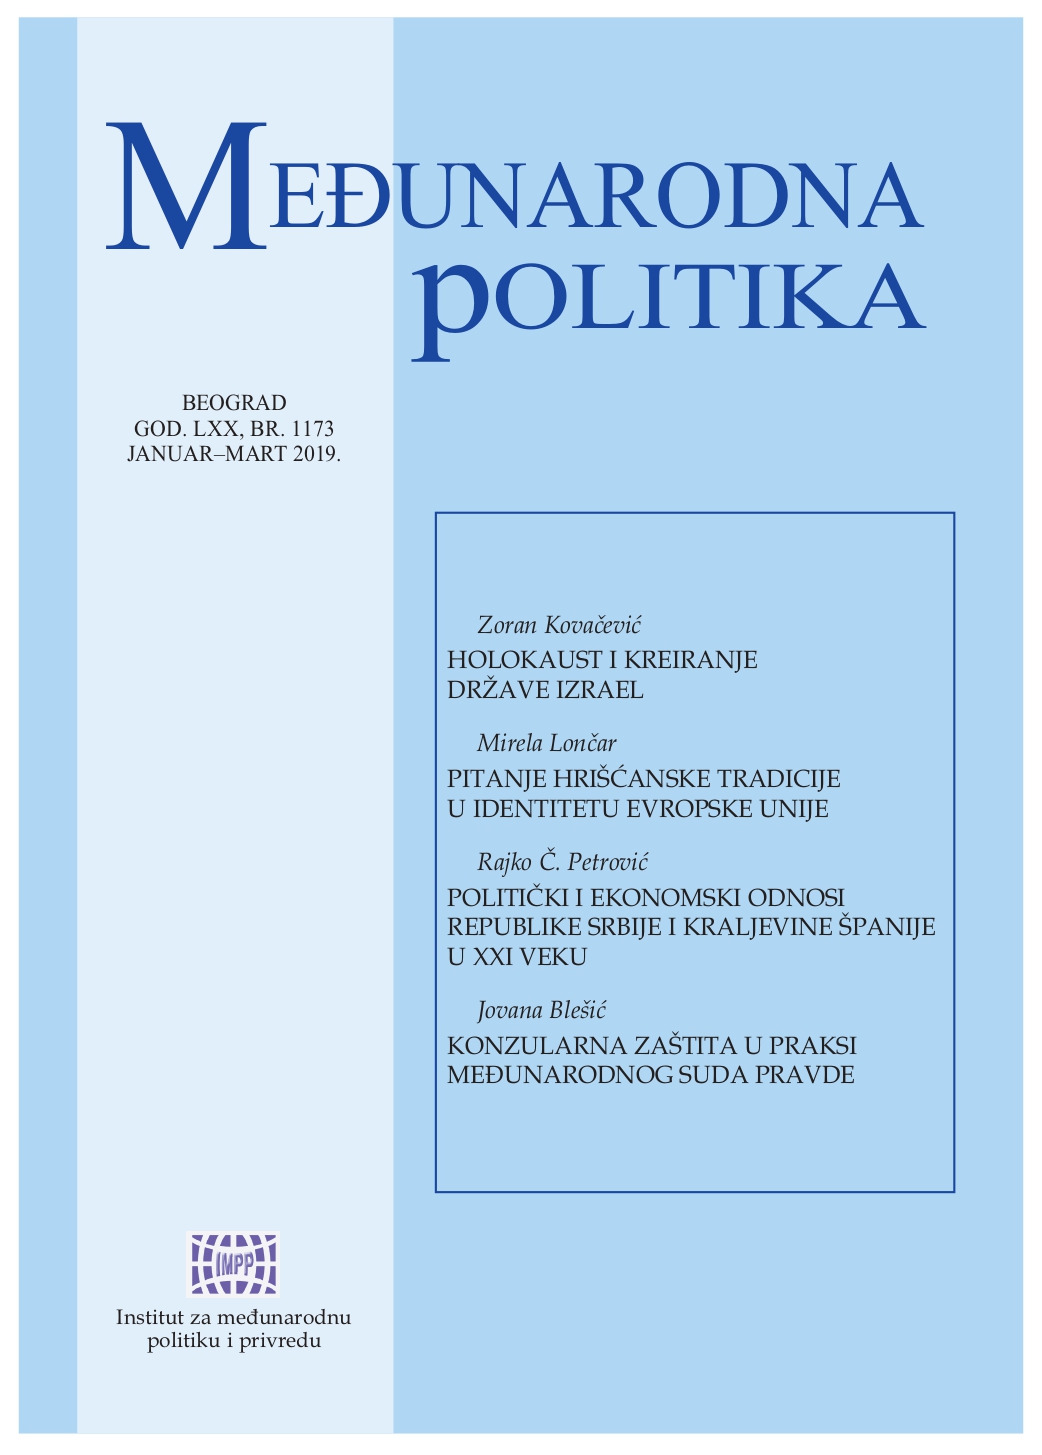 Foreign policy and economic relations of the Republic of Serbia and the Kingdom of Spain in the 21st century Cover Image